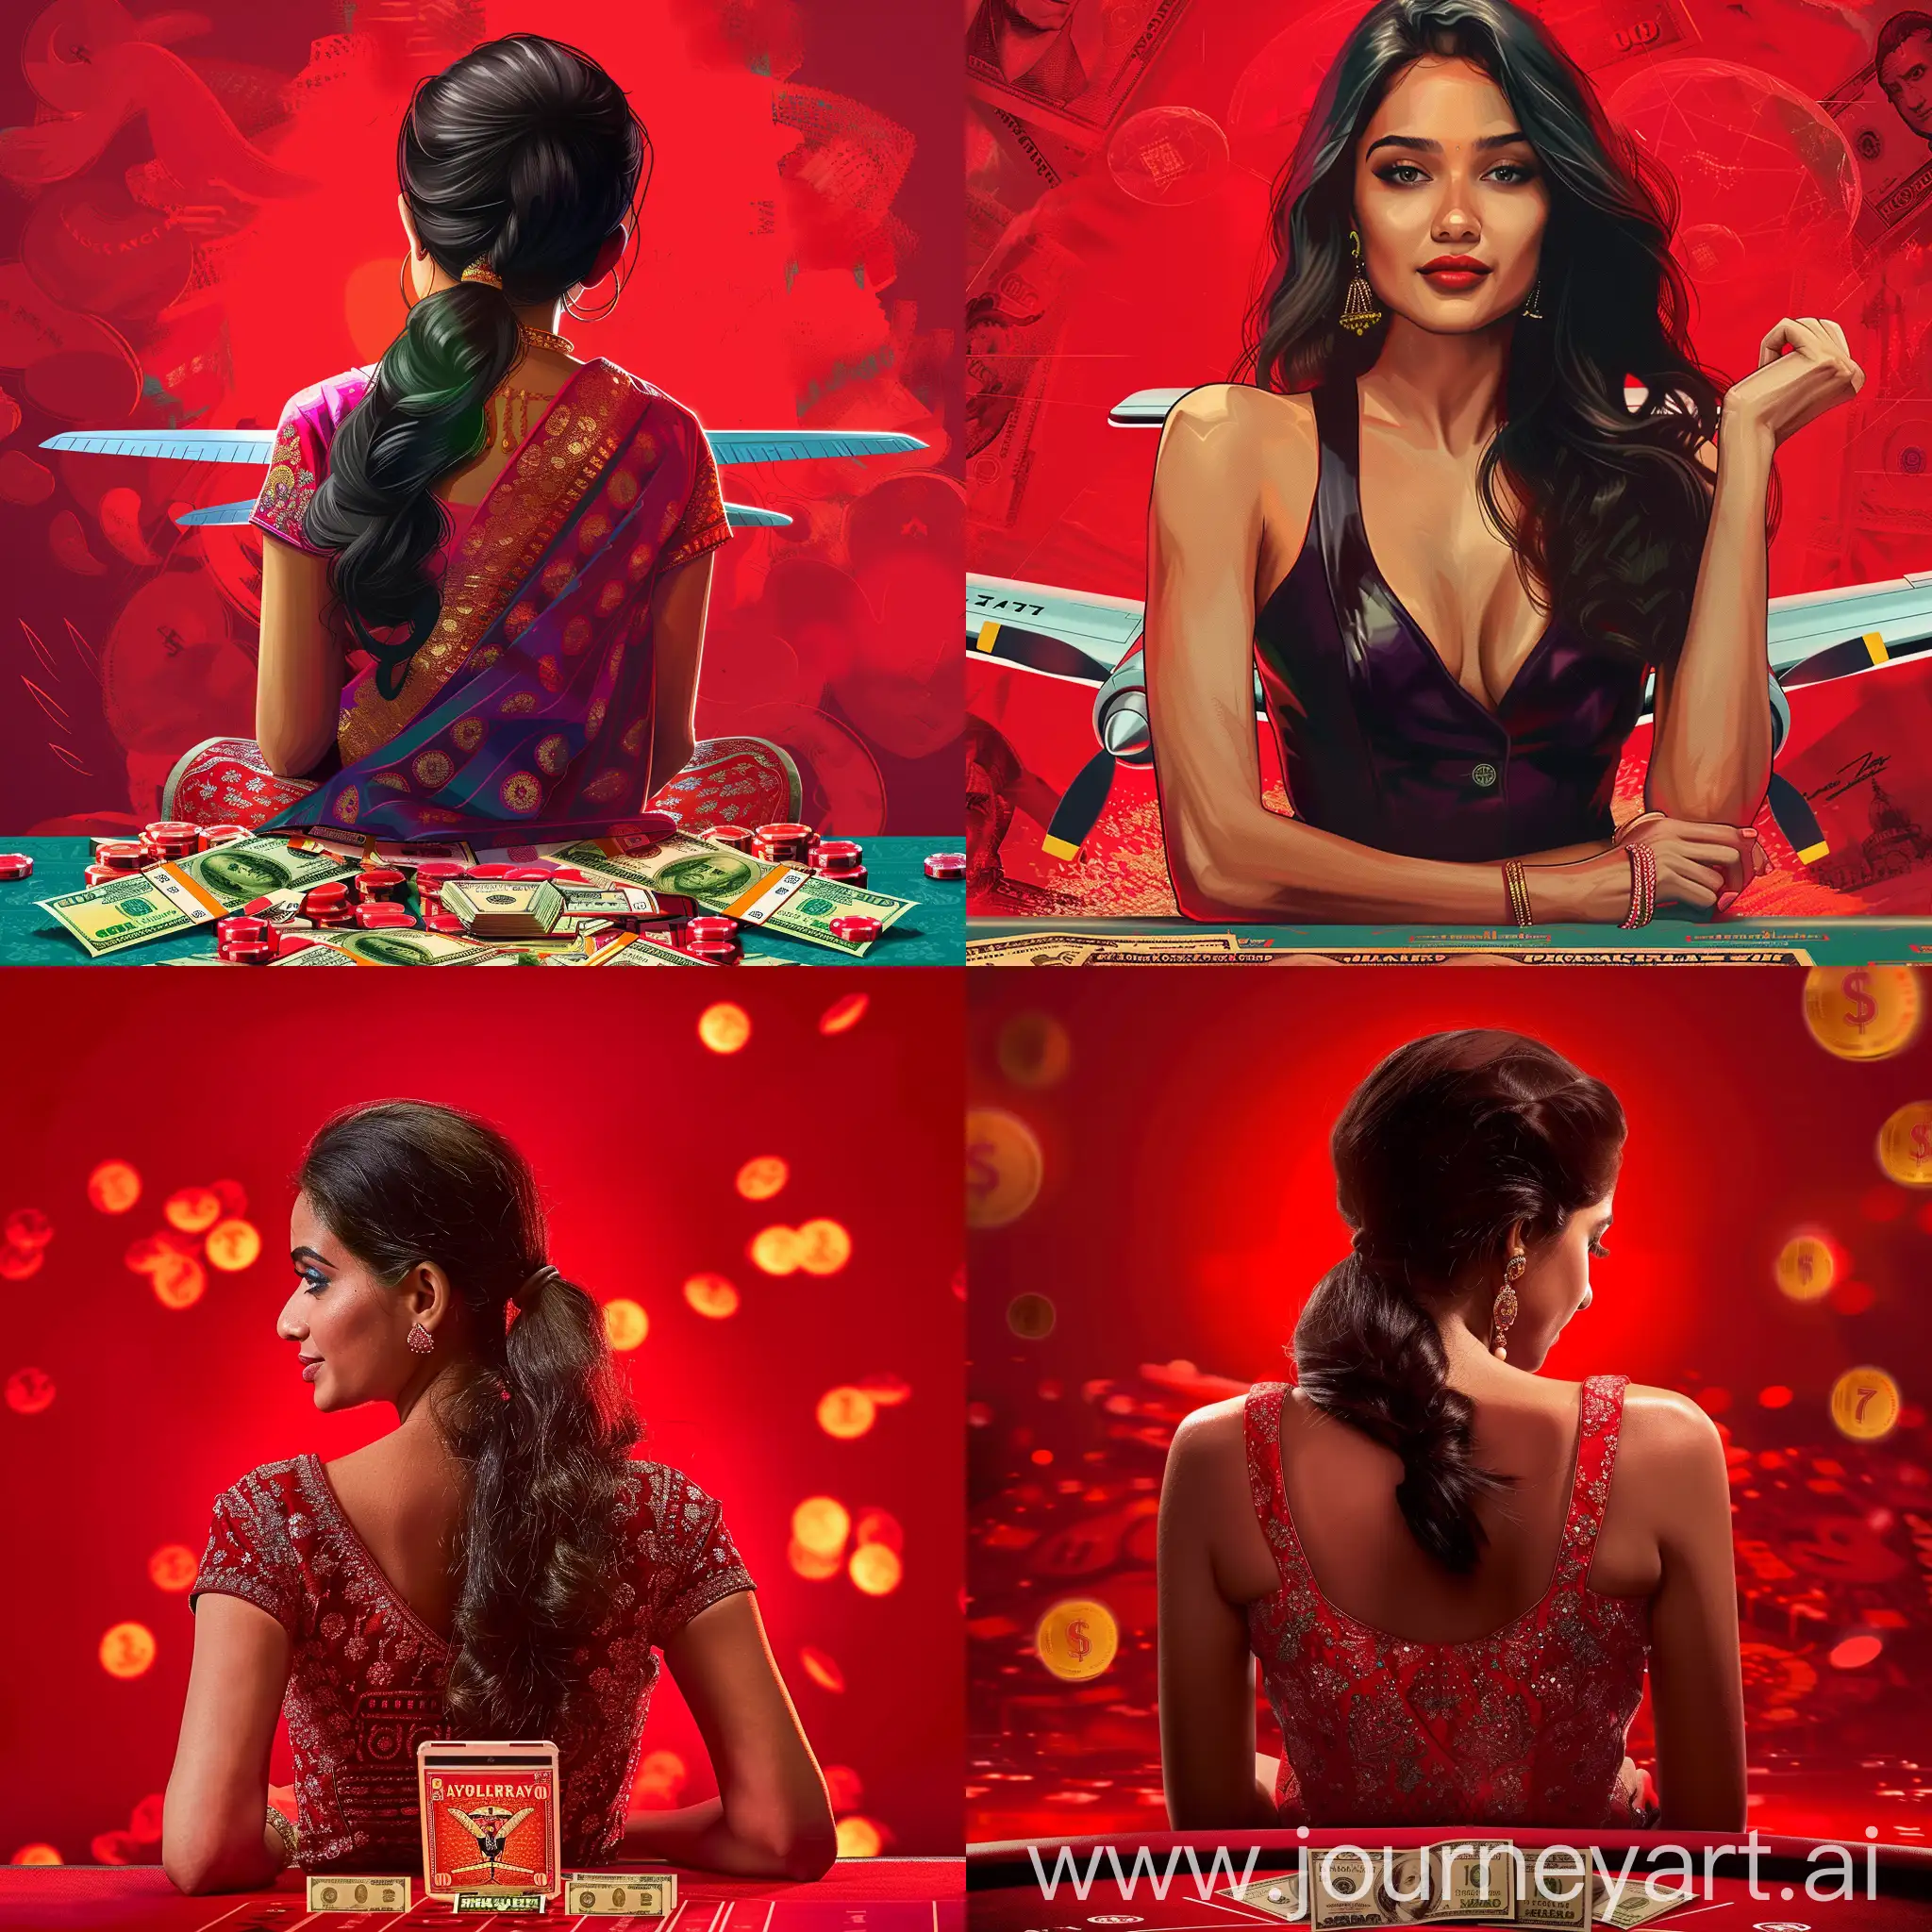 An Indian girl advertises an aviator online casino, with a red background at the back and Indian rupees money at the bottom